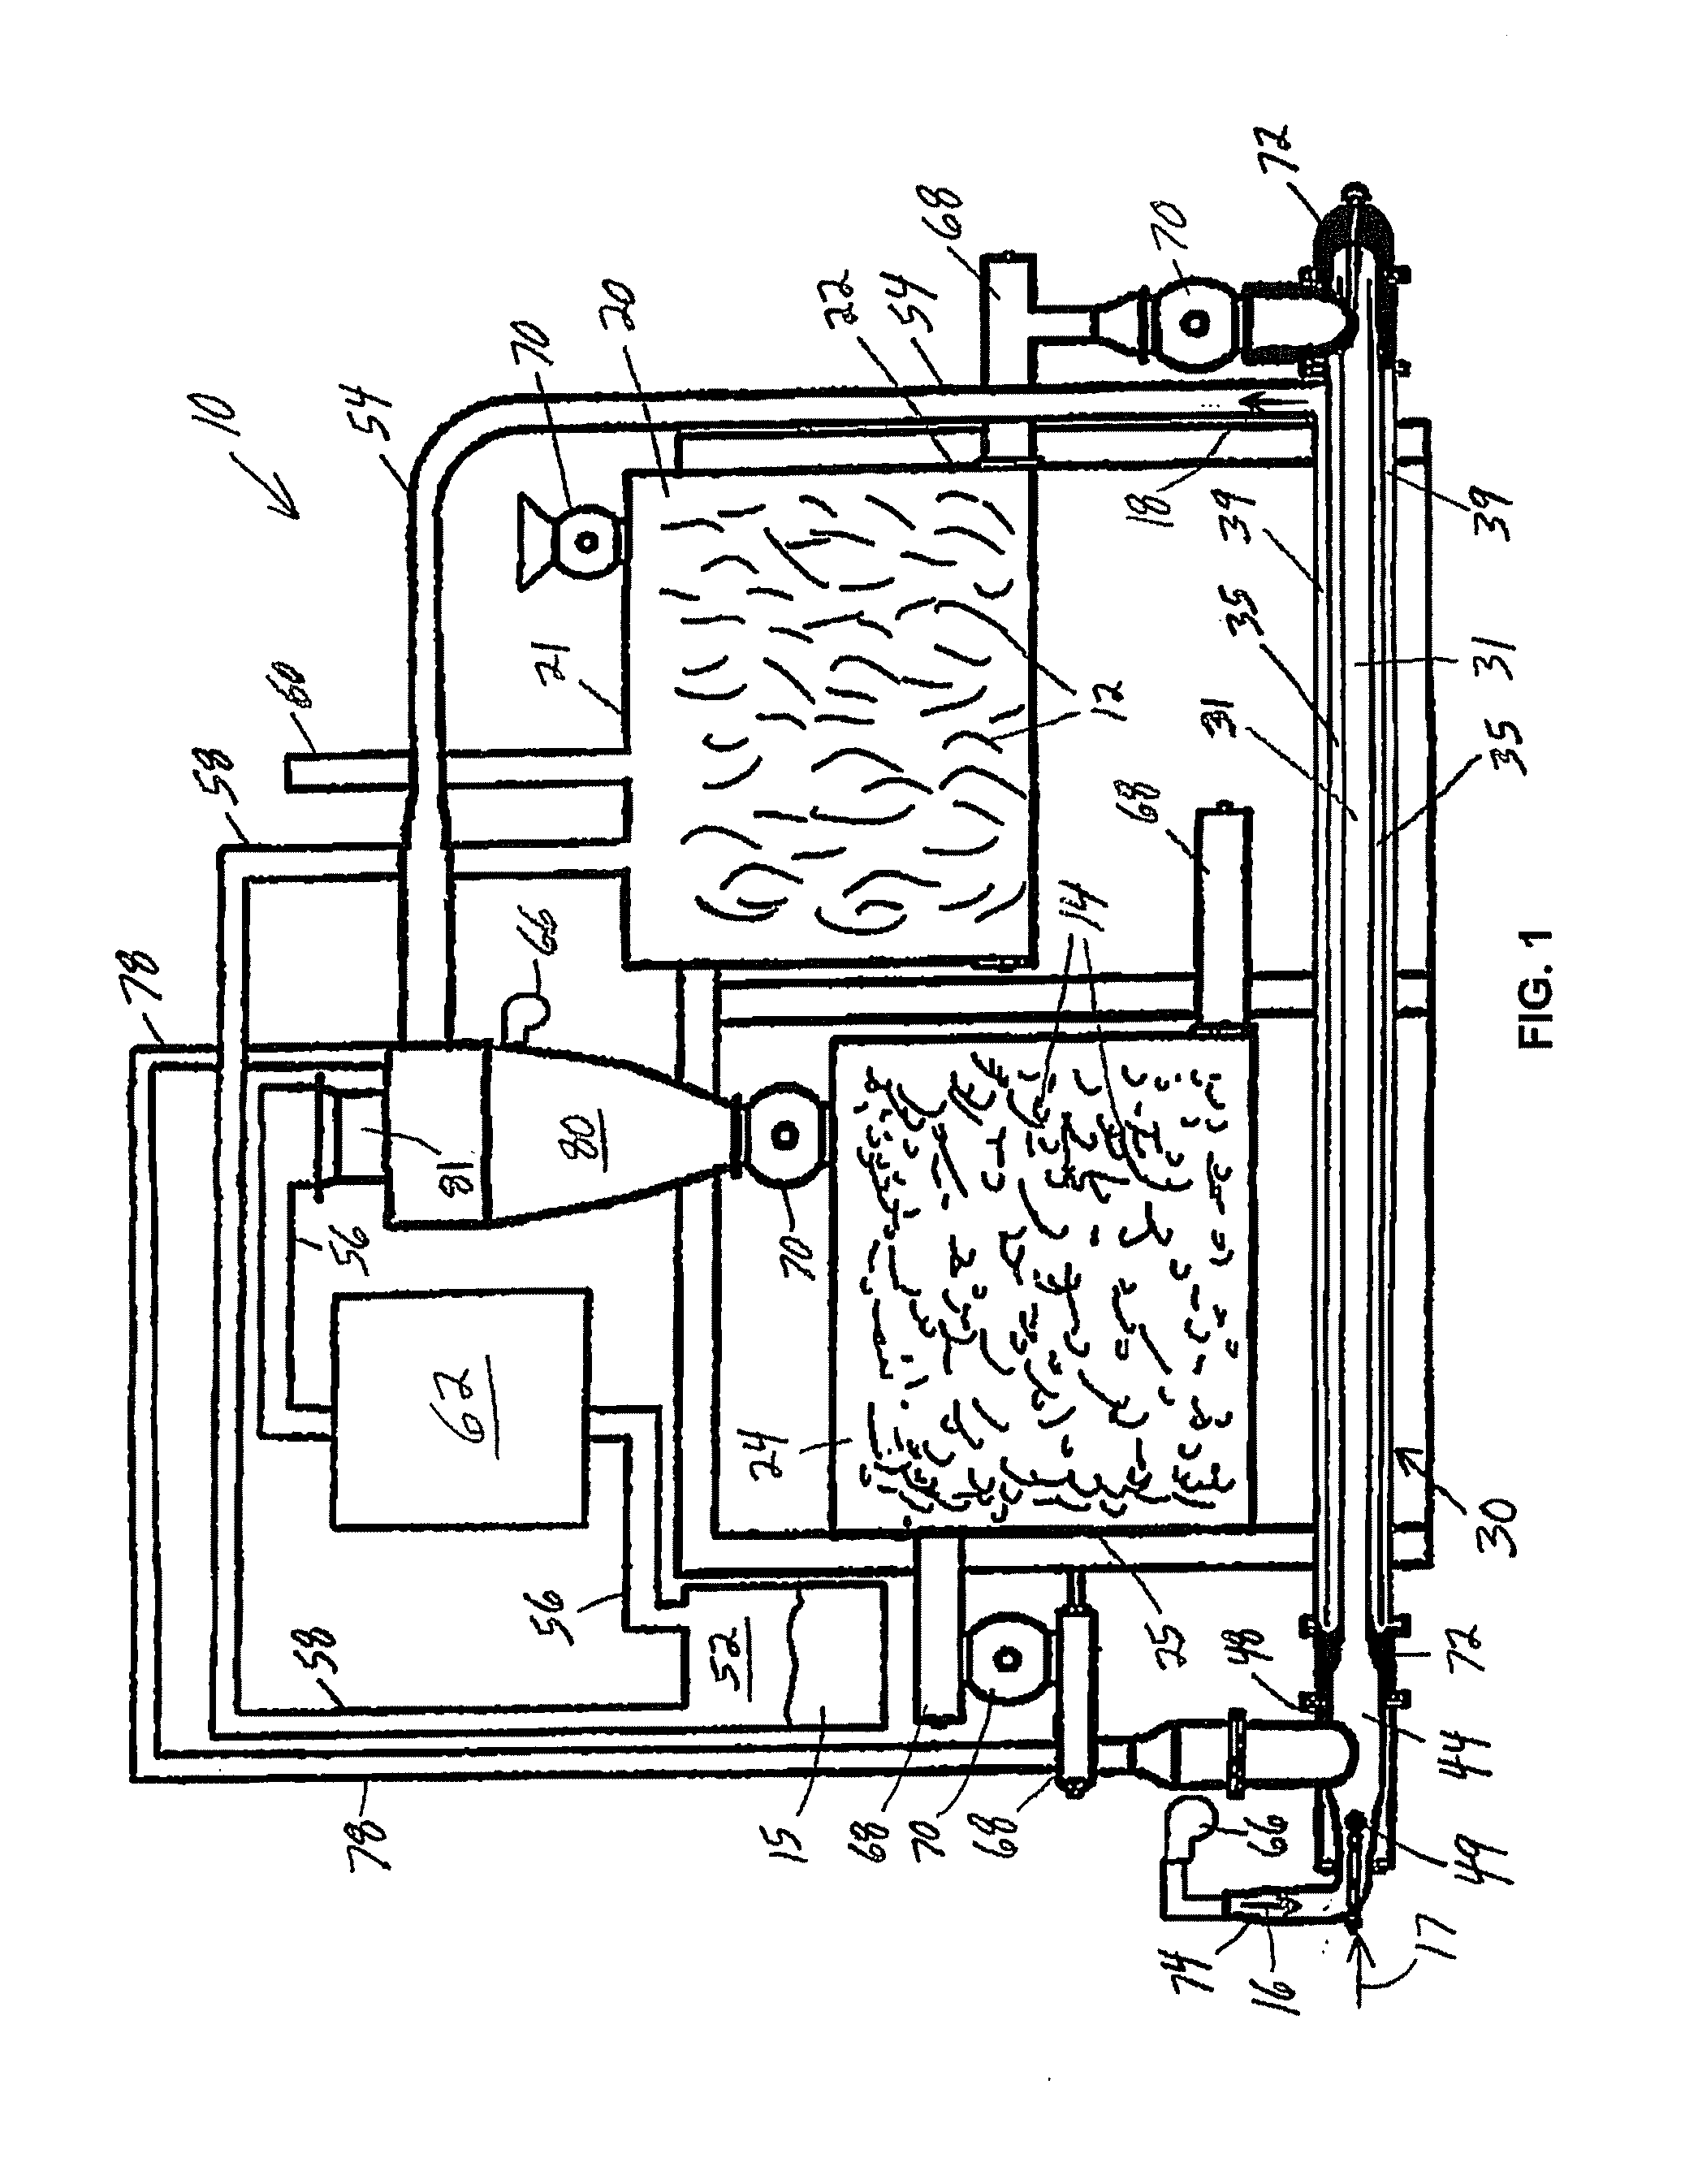 Apparatus, System, and Method for Producing Bio-Fuel Utilizing Concentric-Chambered Pyrolysis